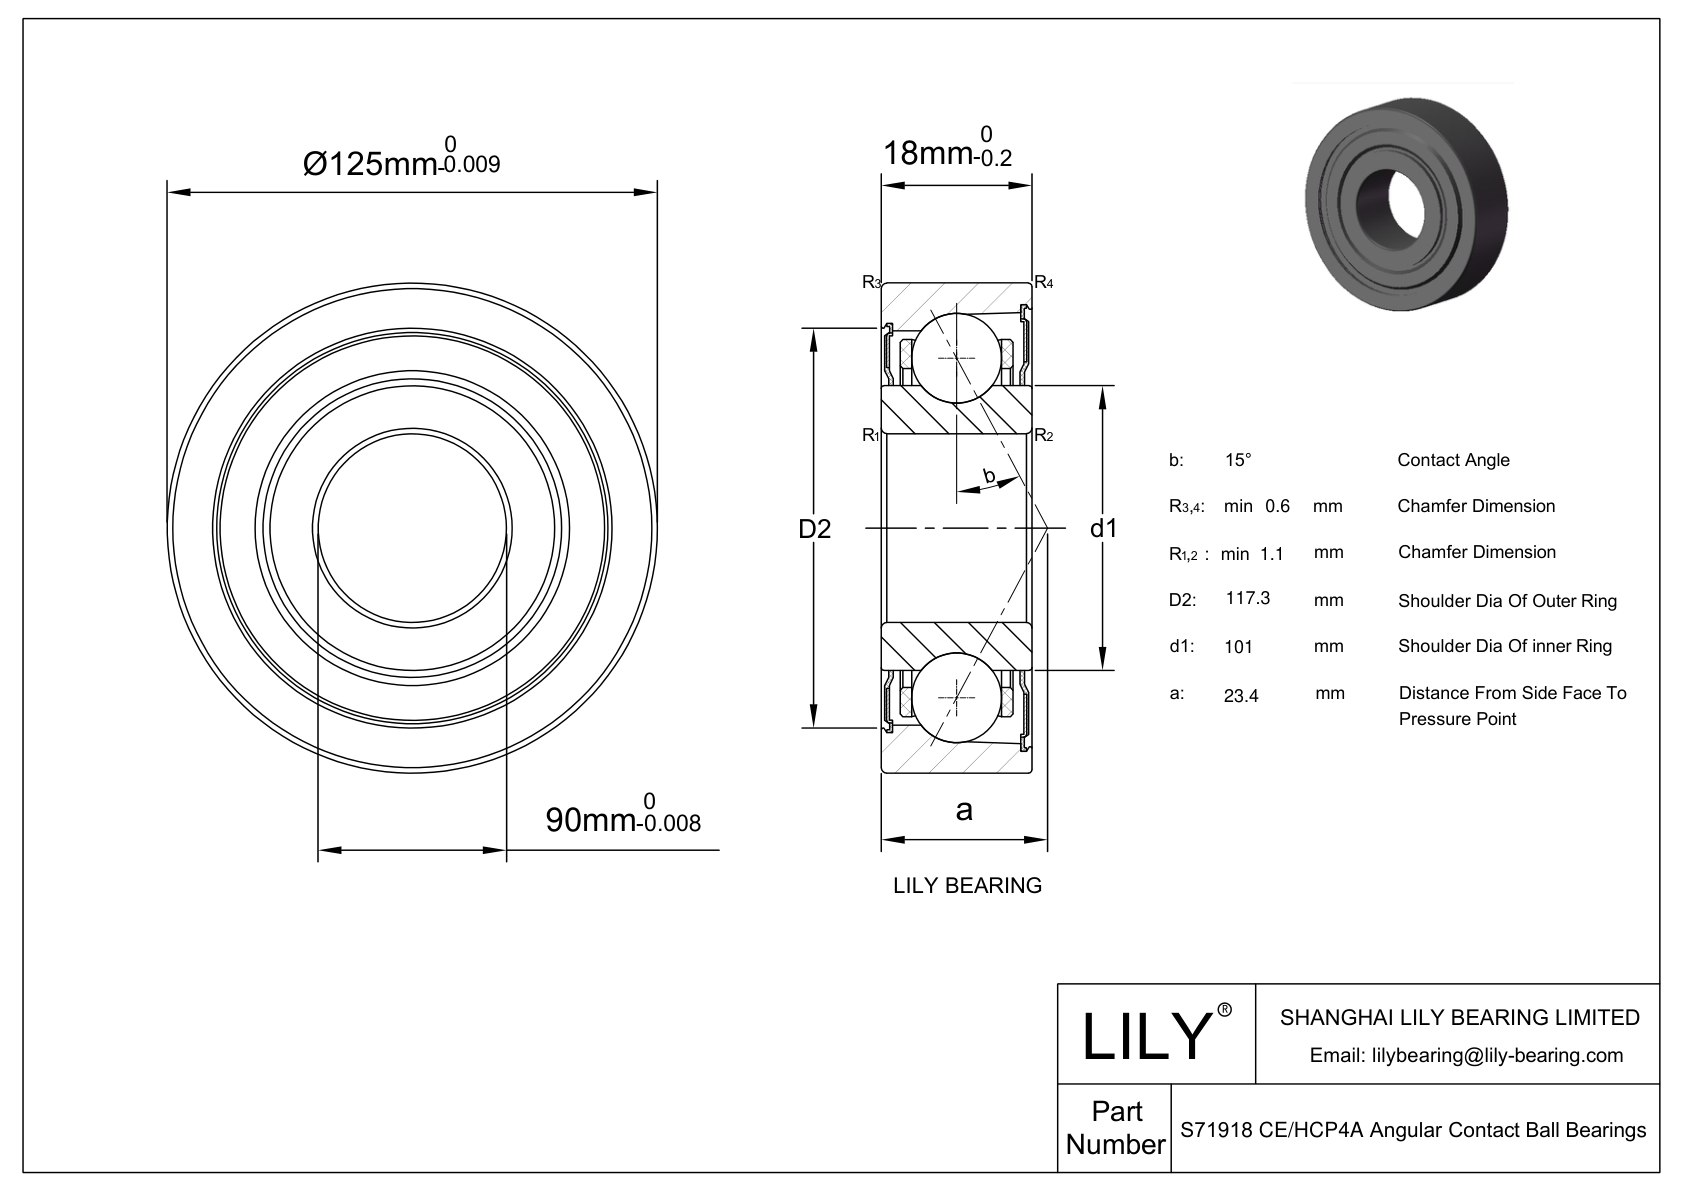 S71918 CE/HCP4A Super Precision Angular Contact Ball Bearings cad drawing